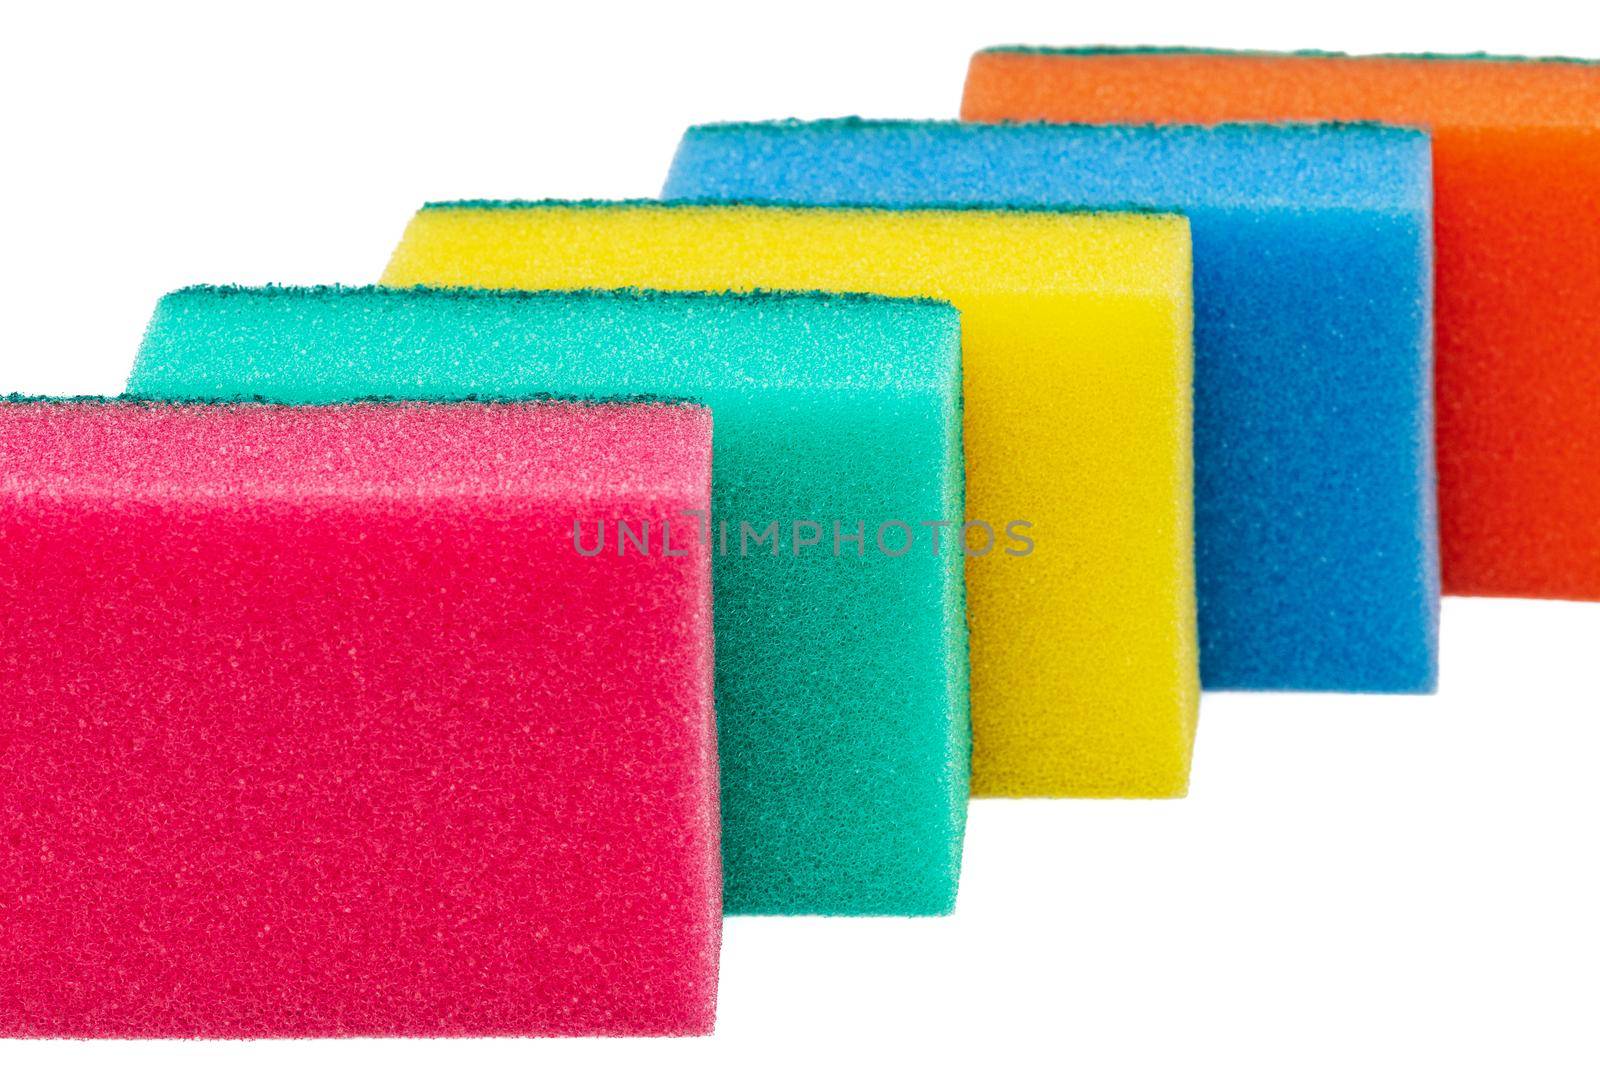 Set of different bright colored foam sponges for everyday cleaning in kitchen and washing dishes. Five sponges in pink, green, yellow, blue and orange colors on white background. Close-up, horizontal.